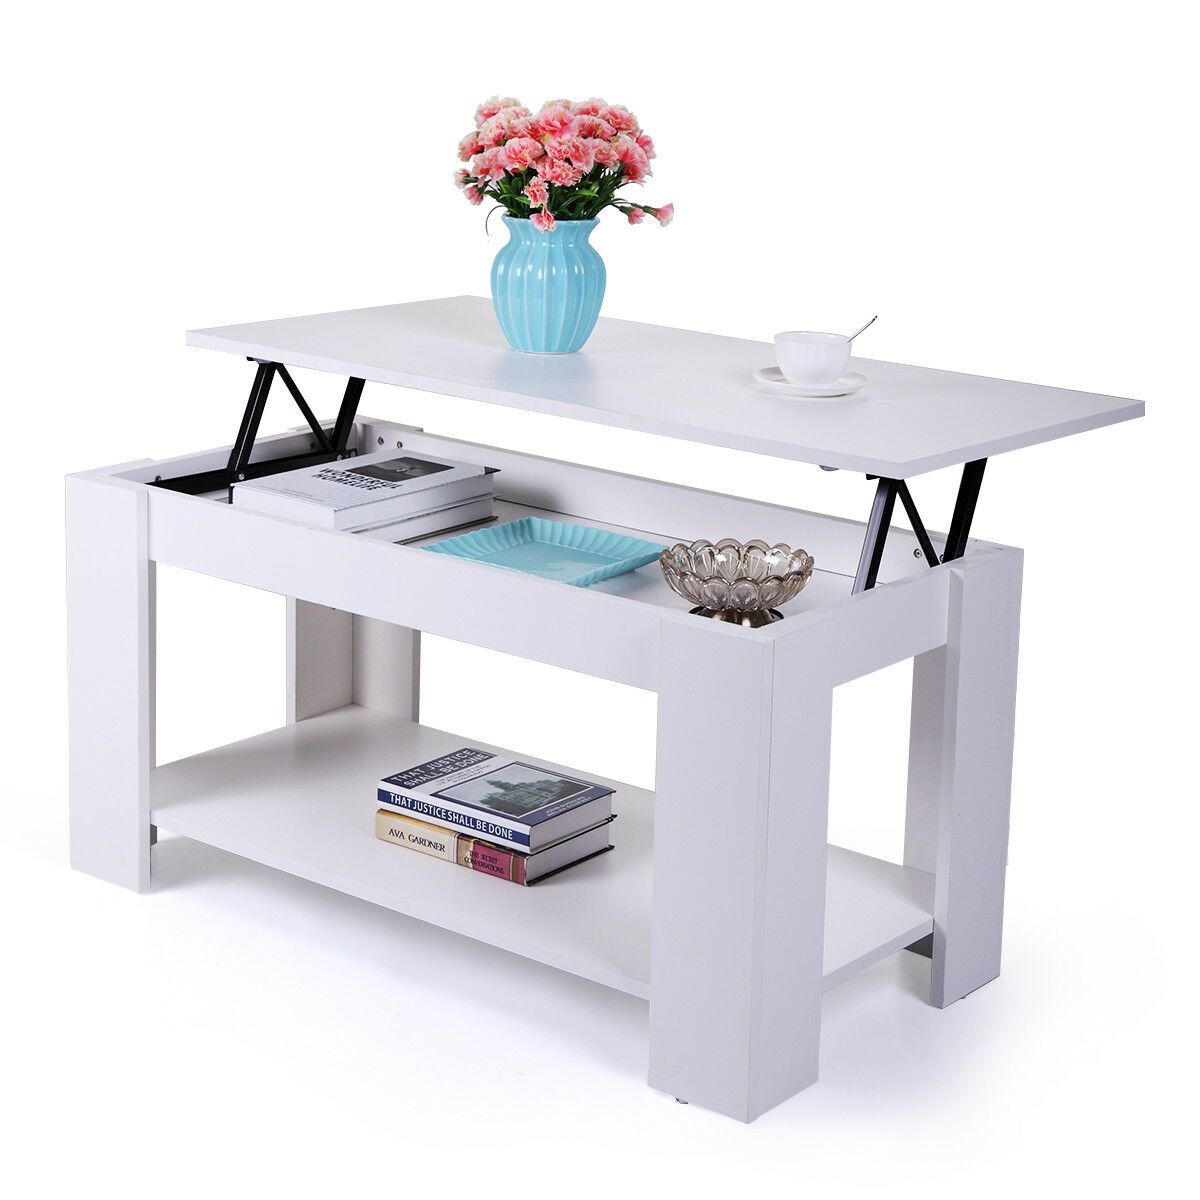 Lowestbest Lift Top Coffee Table, White Coffee Table With Regarding Espresso Wood Storage Coffee Tables (View 14 of 15)